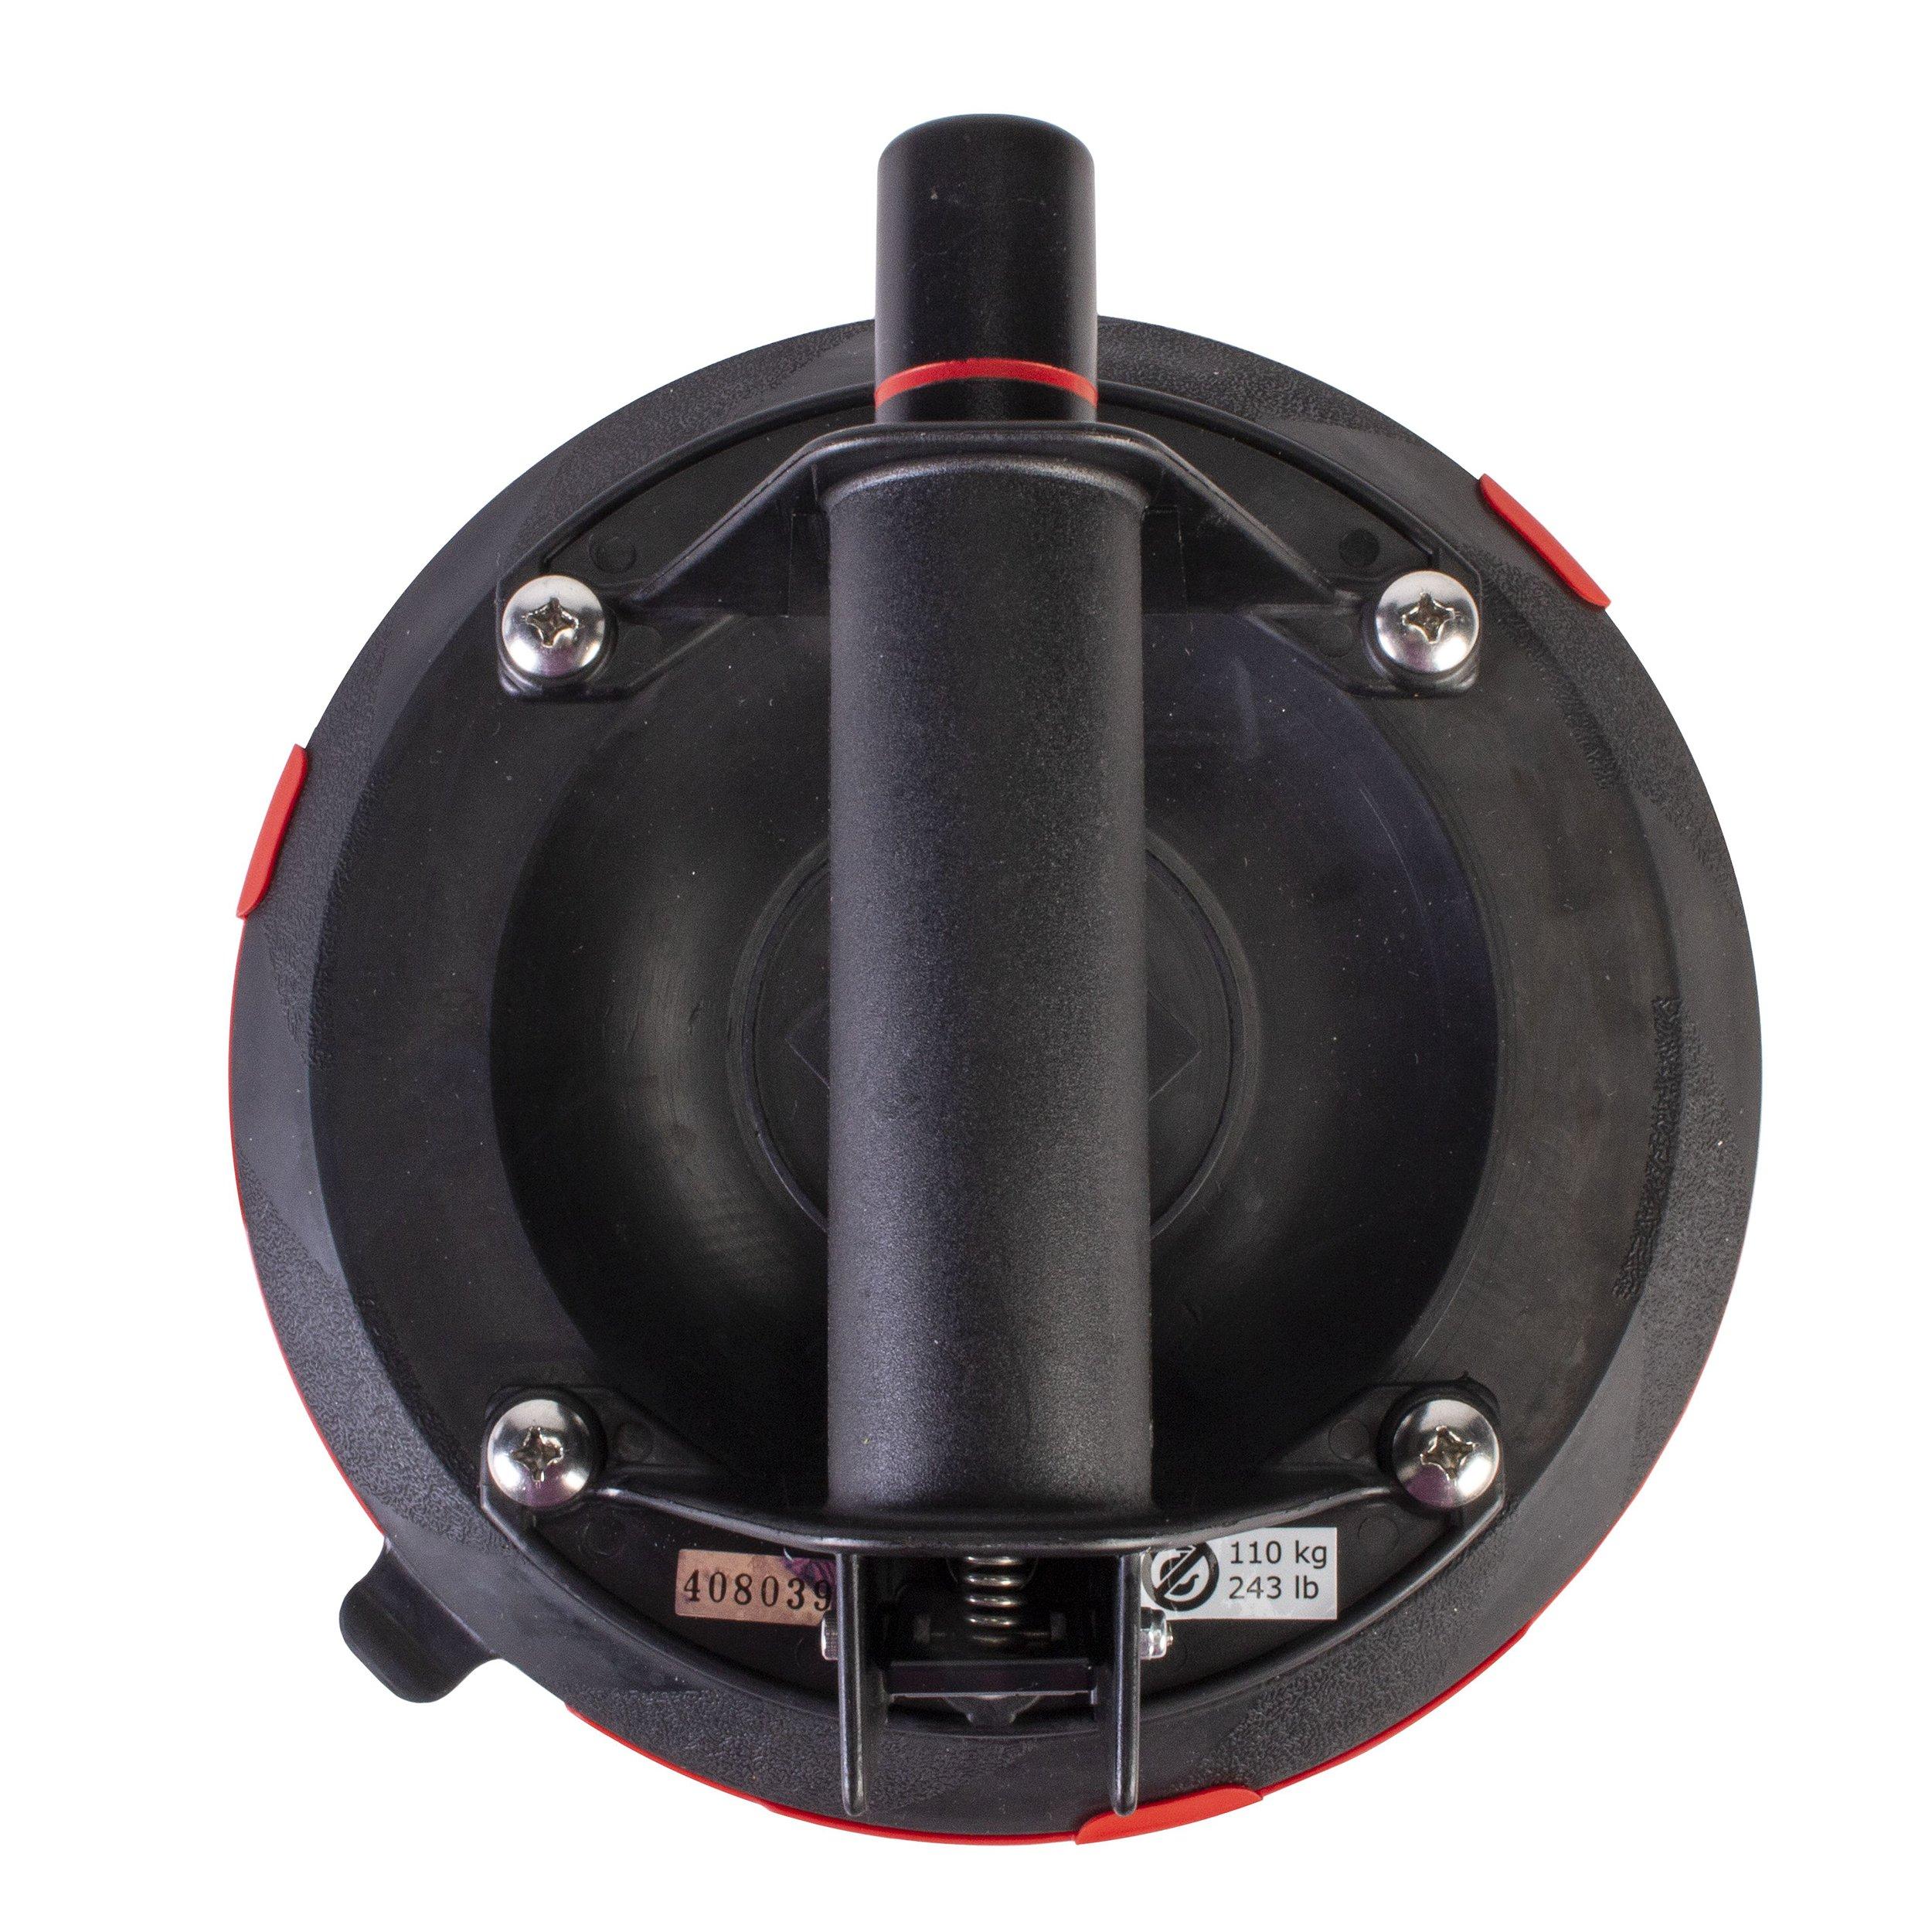 Rubi Vacuum Suction Cup for Tile Handling